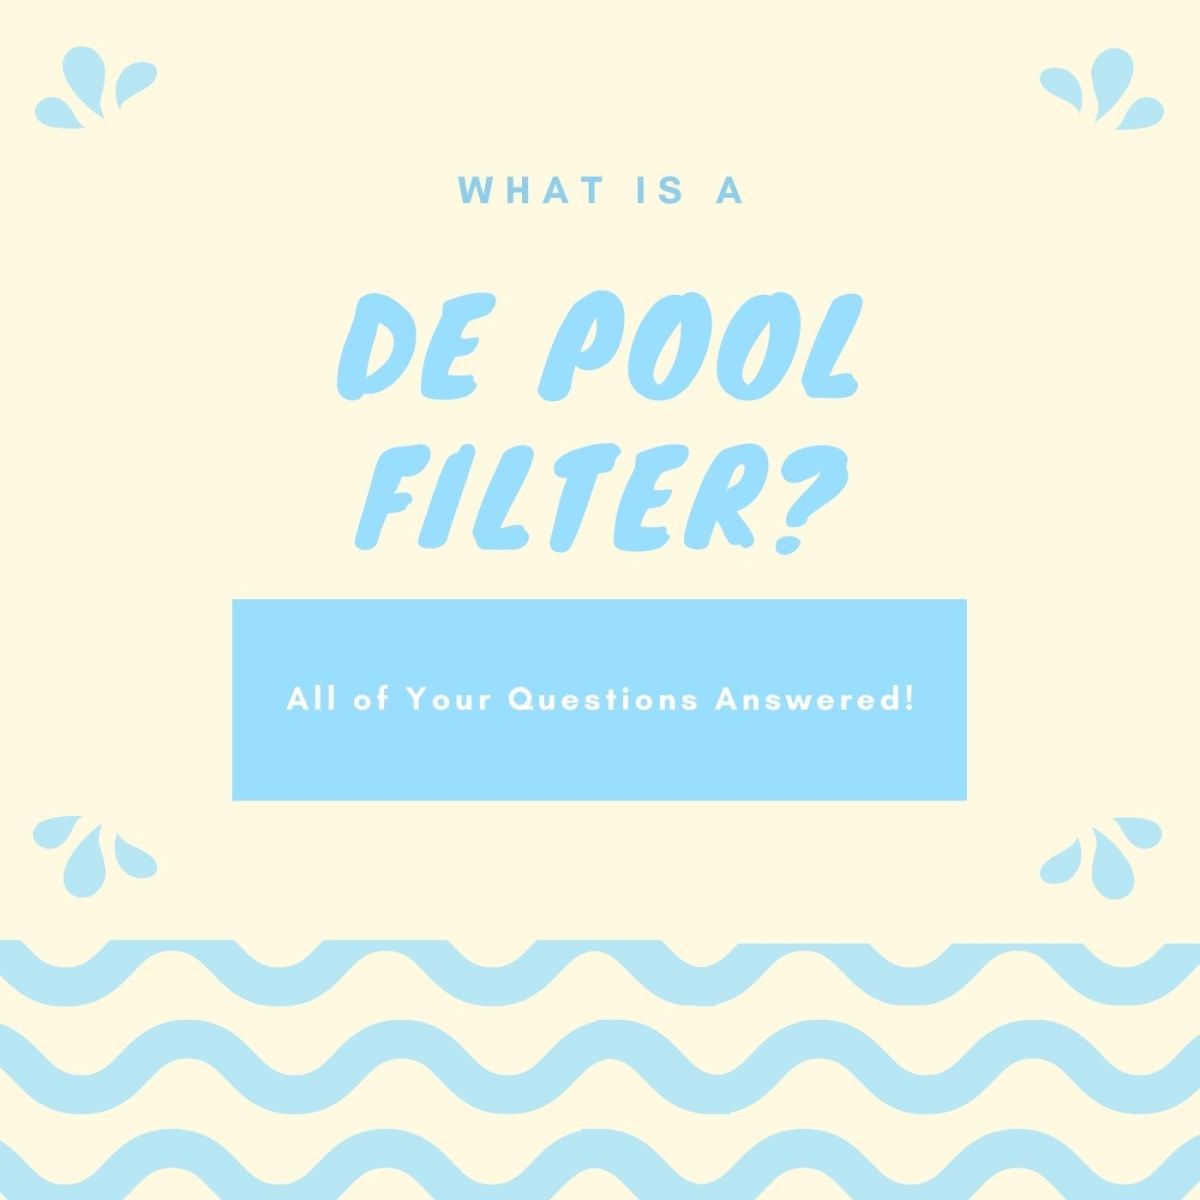 What Is a DE Pool Filter and How Does It Work?